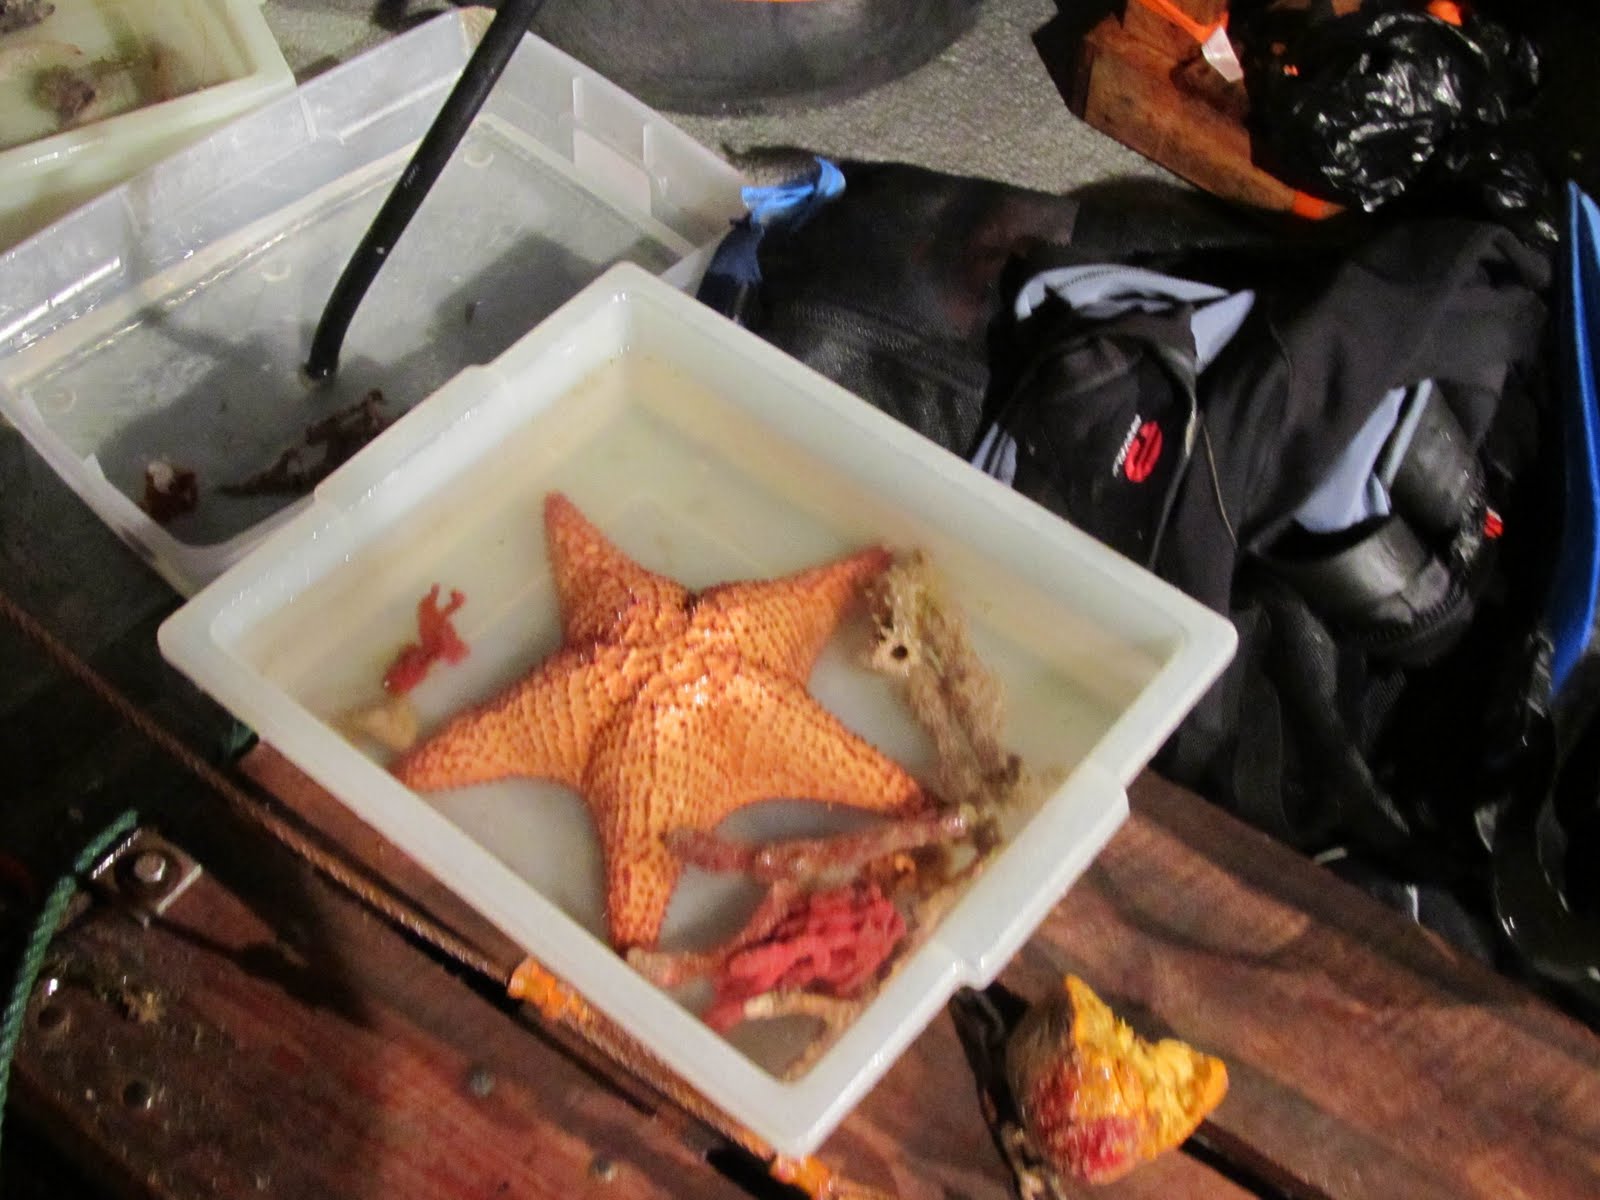 large tray with specimens including a giant orange sea star